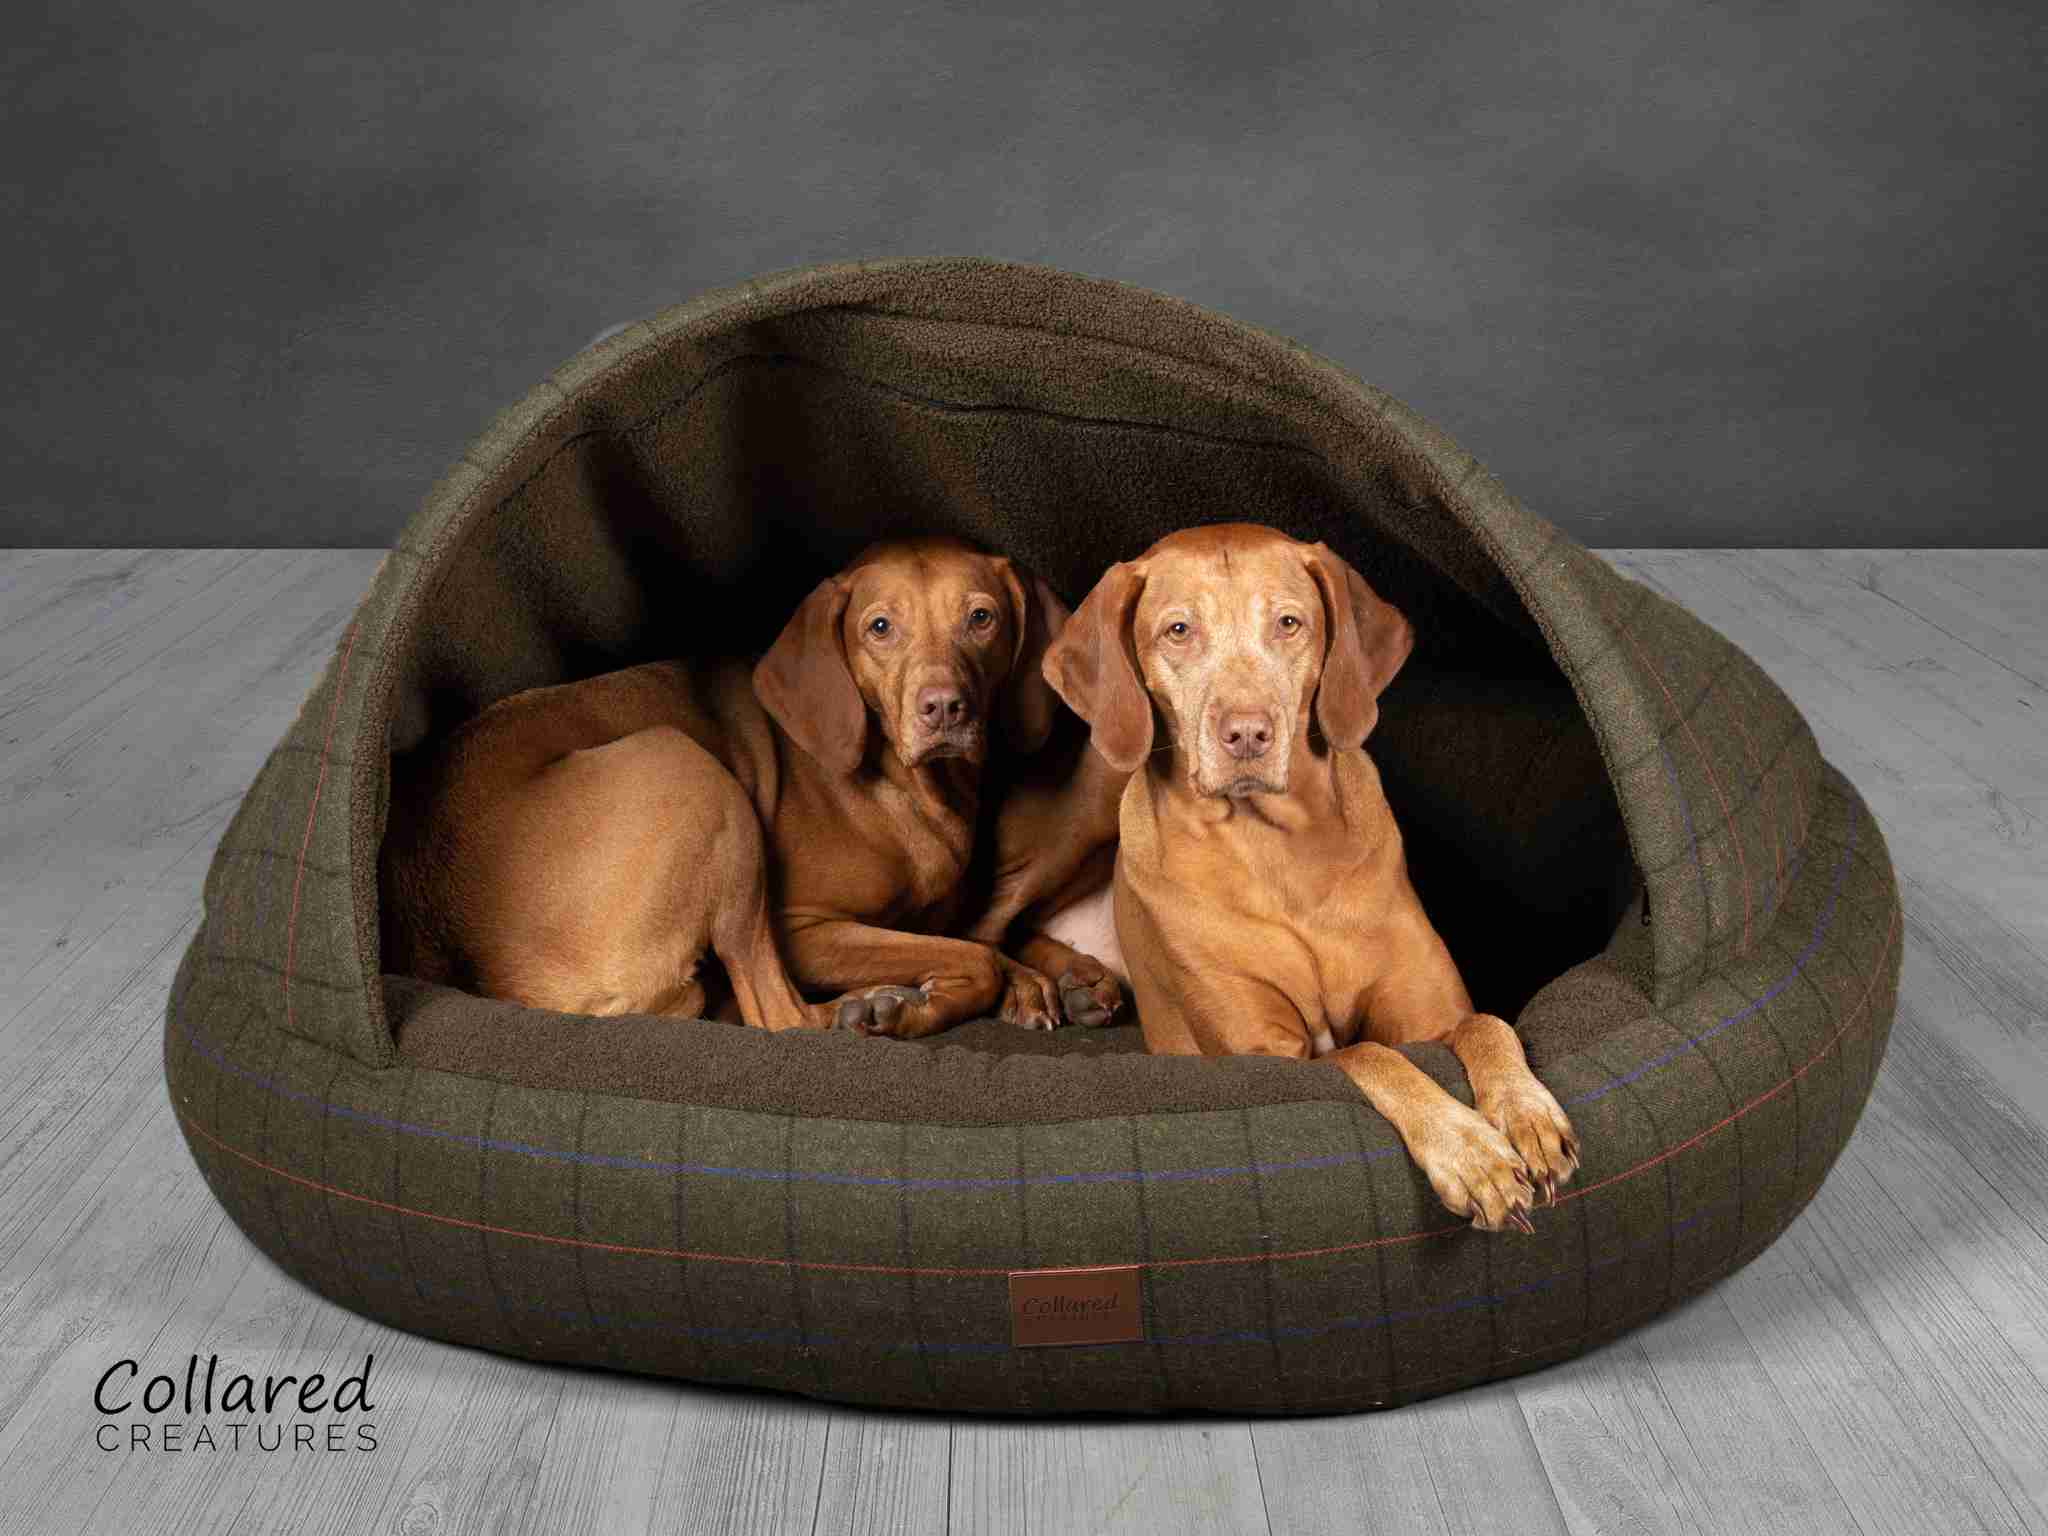 Collared Creatures Green Tweed Deluxe Comfort Cocoon Dog Cave Bed 2 dogs in